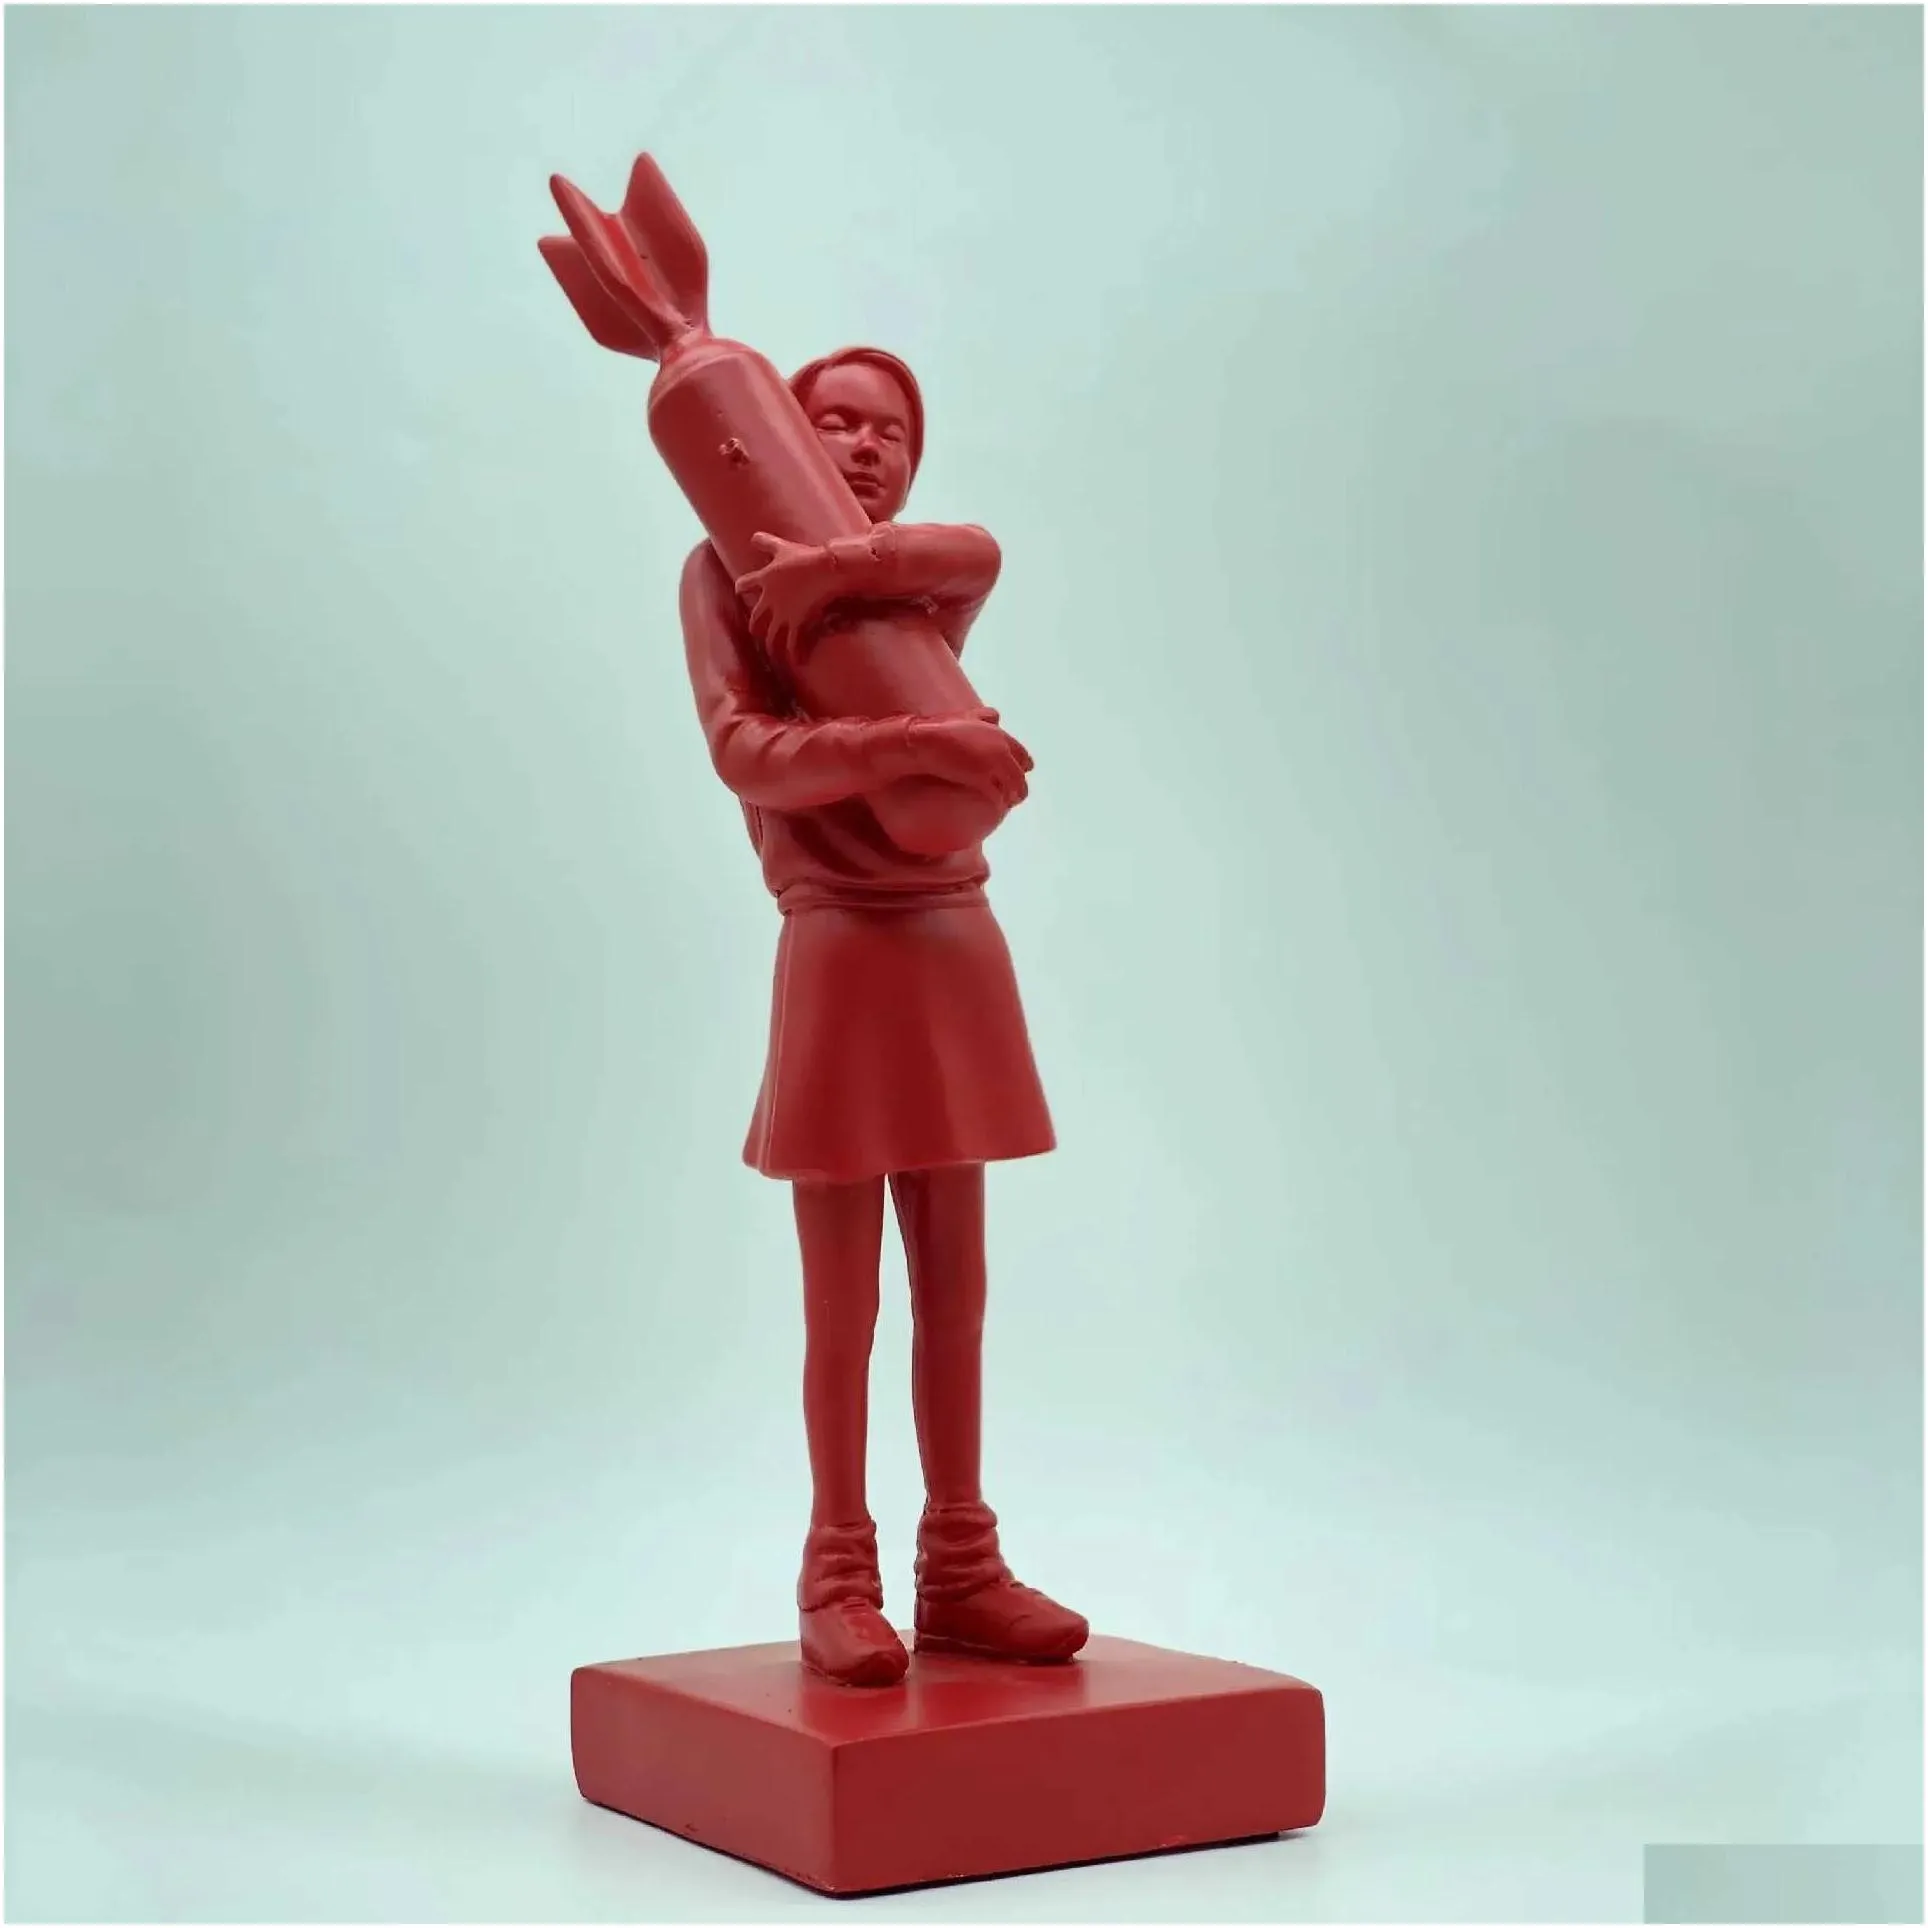 Decorative Objects & Figurines Bomb Her Girl Statue Banksy Peace Theme Modern Art Design Model Resin Hing Scpture Ornaments Home Decor Dh4Yz